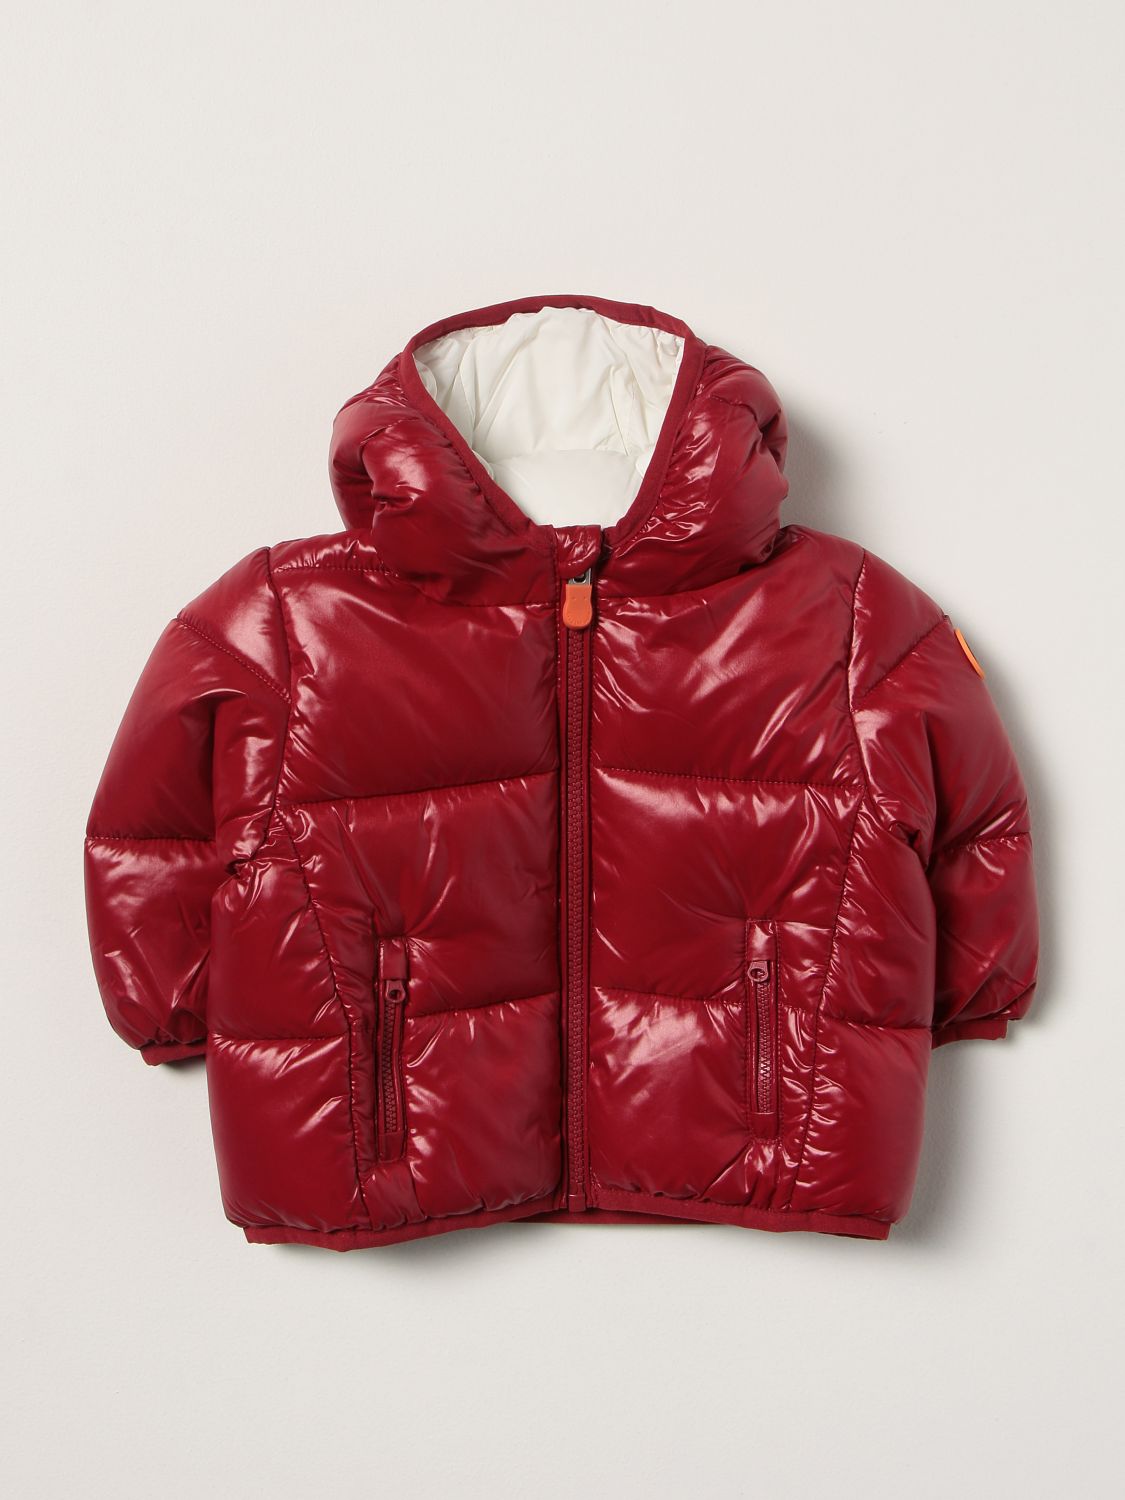 Jacket Save The Duck: Jacket kids Save The Duck burgundy 1